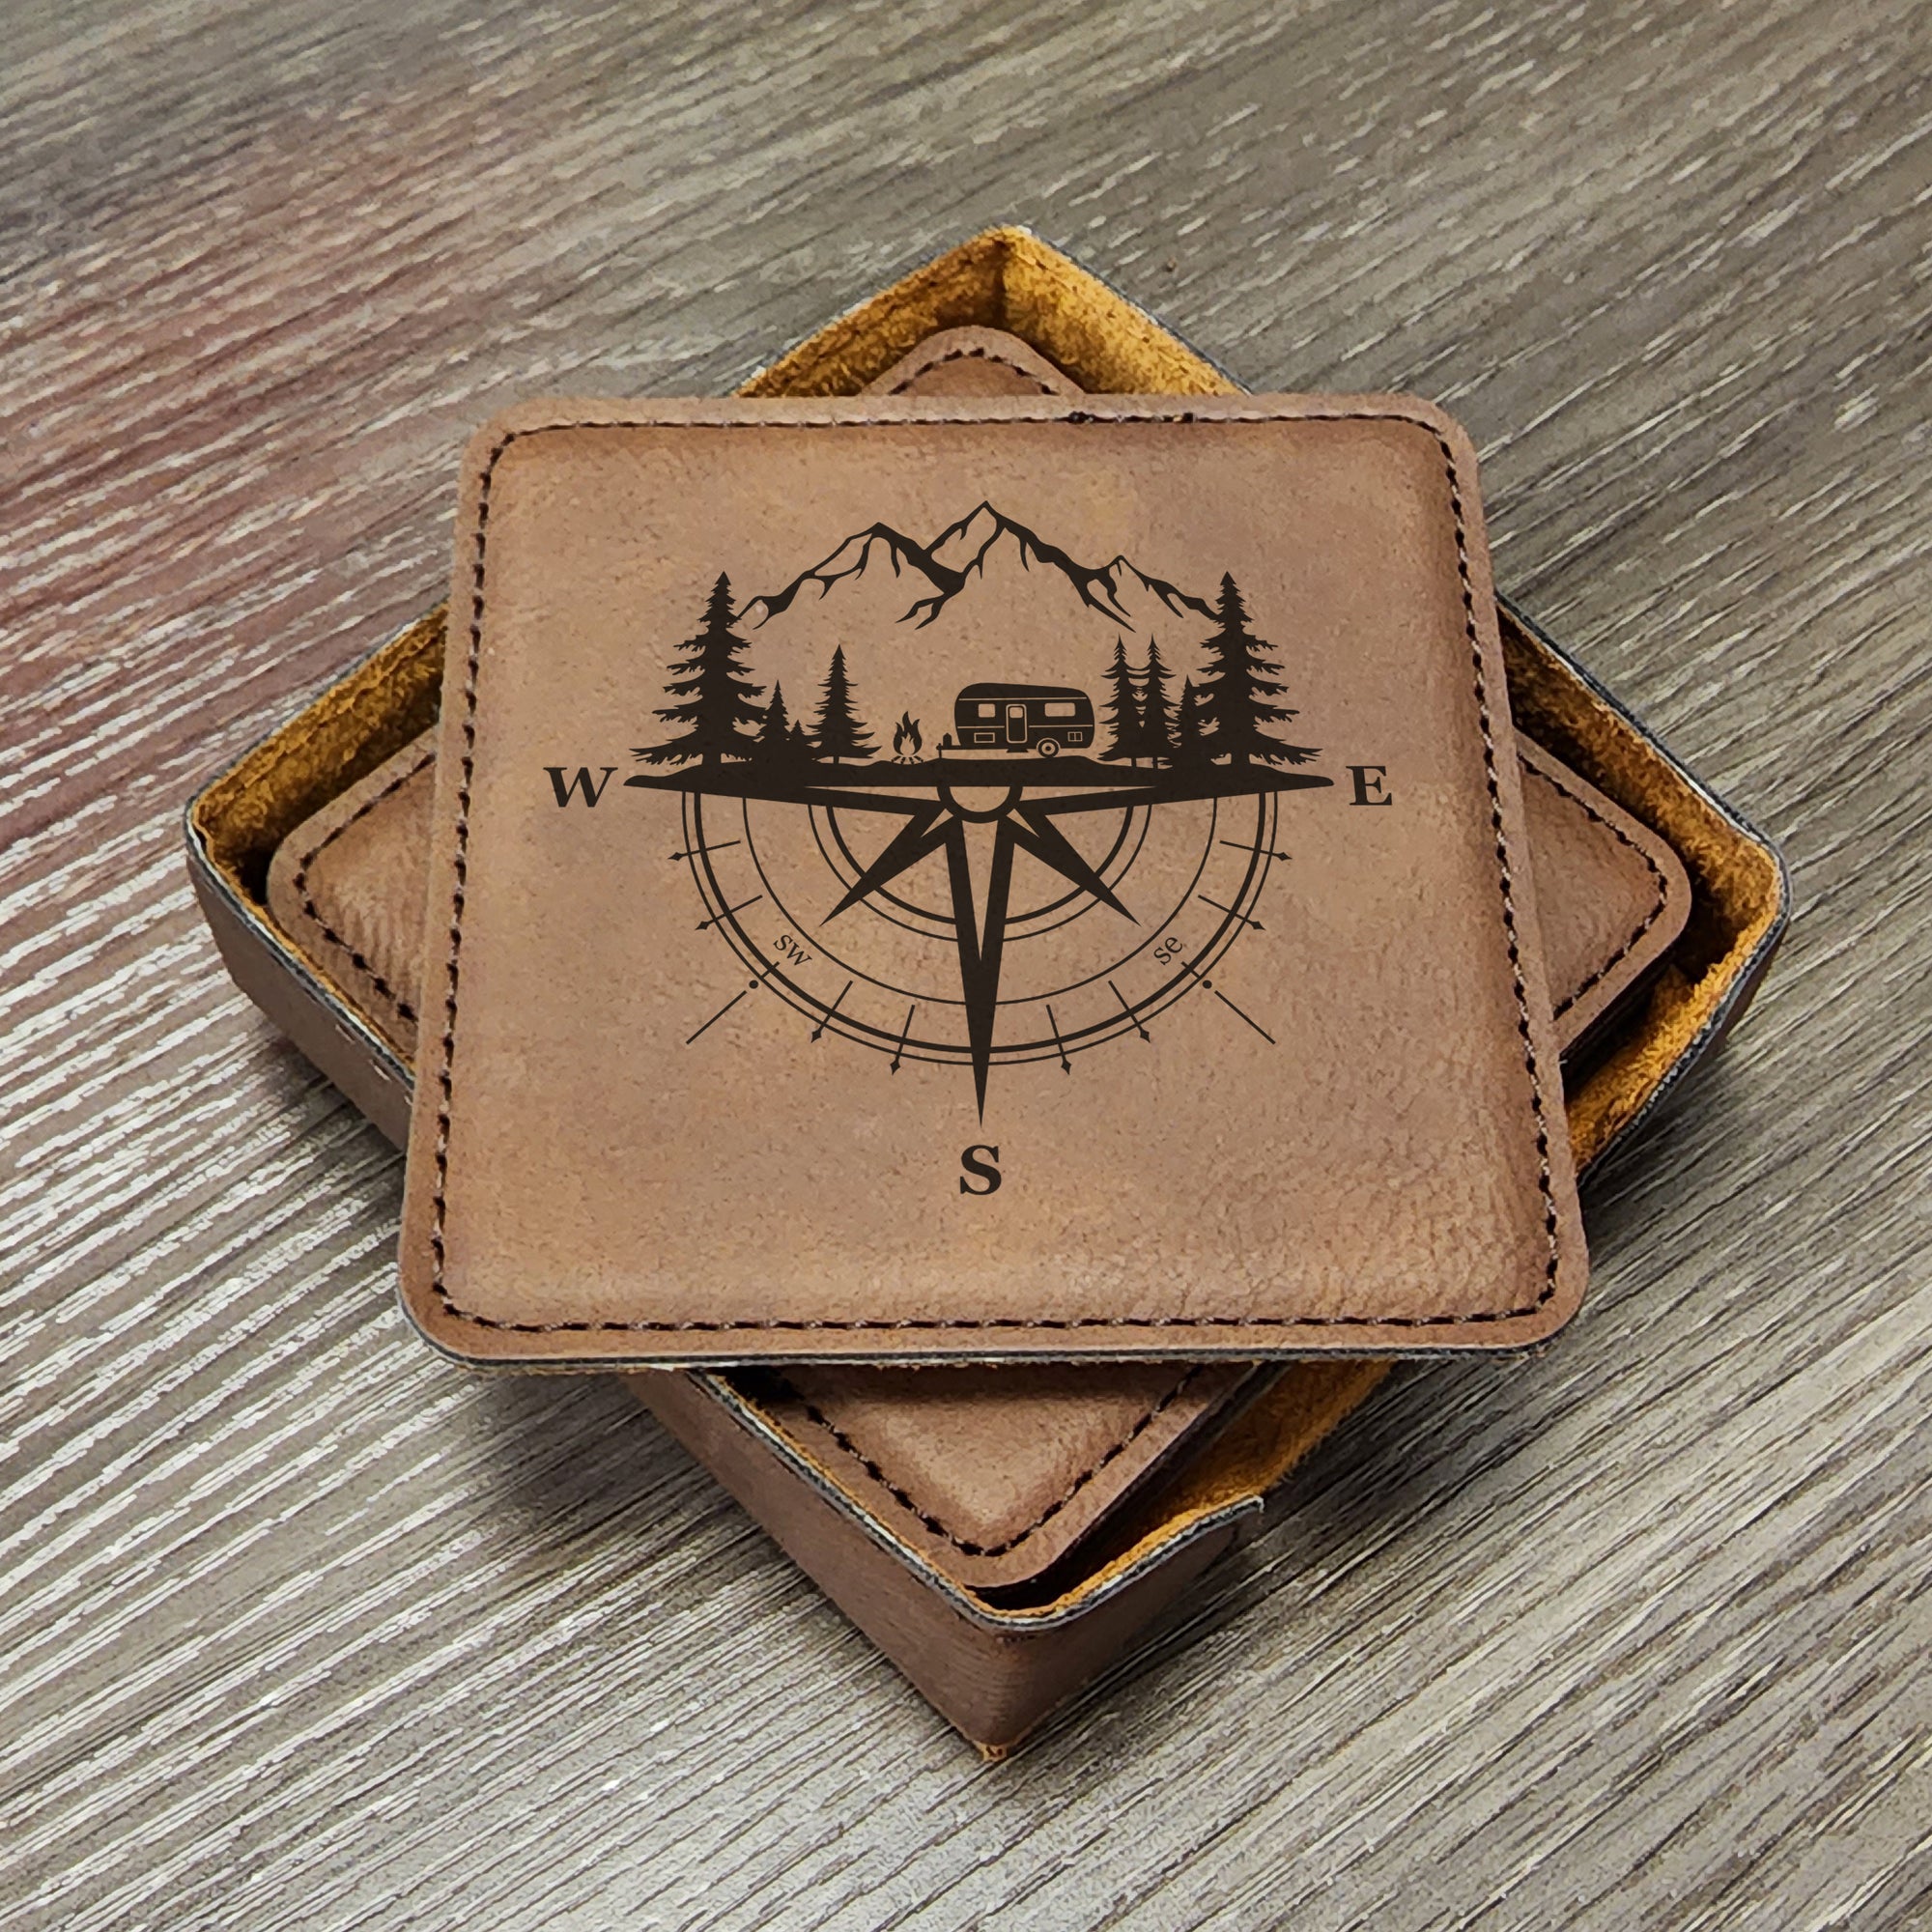 RV Camper Travel Trailer Coasters Forests, Mountains and Compass - Great for RVing, Adventure Loving Campers Gifts, Set of 6 With Holder